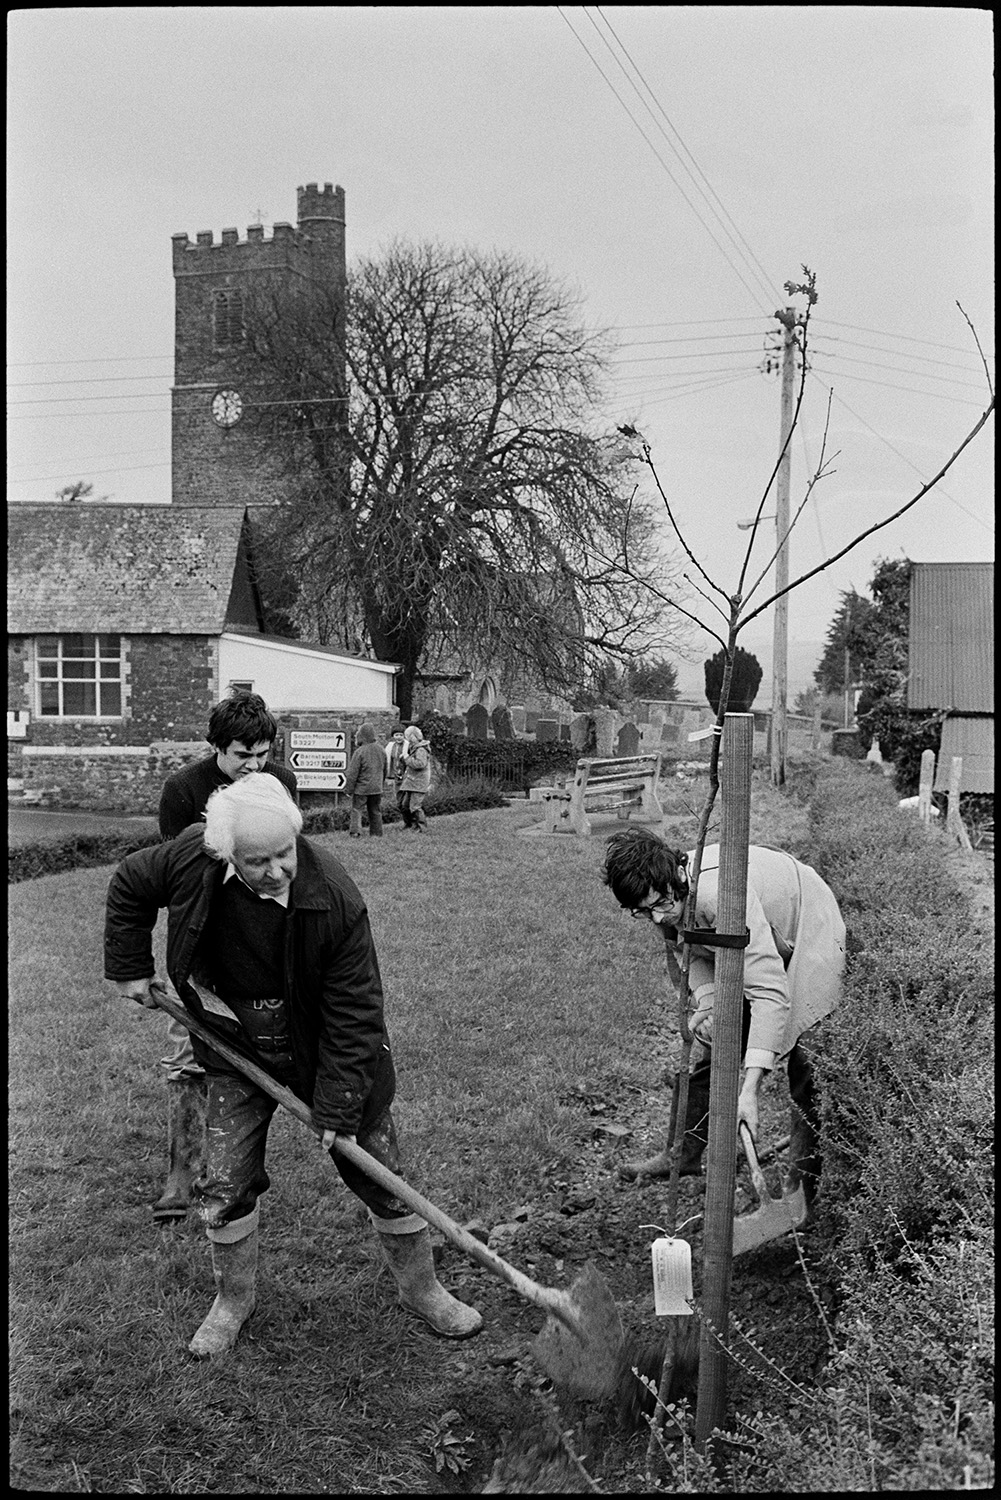 People planting tree to mark the Jubilee. 
[Men planting a tree to celebrate the Silver Jubilee of Queen Elizabeth II in Atherington. Two men are filling the hole with earth. The church tower with a clock can be seen in the background.]